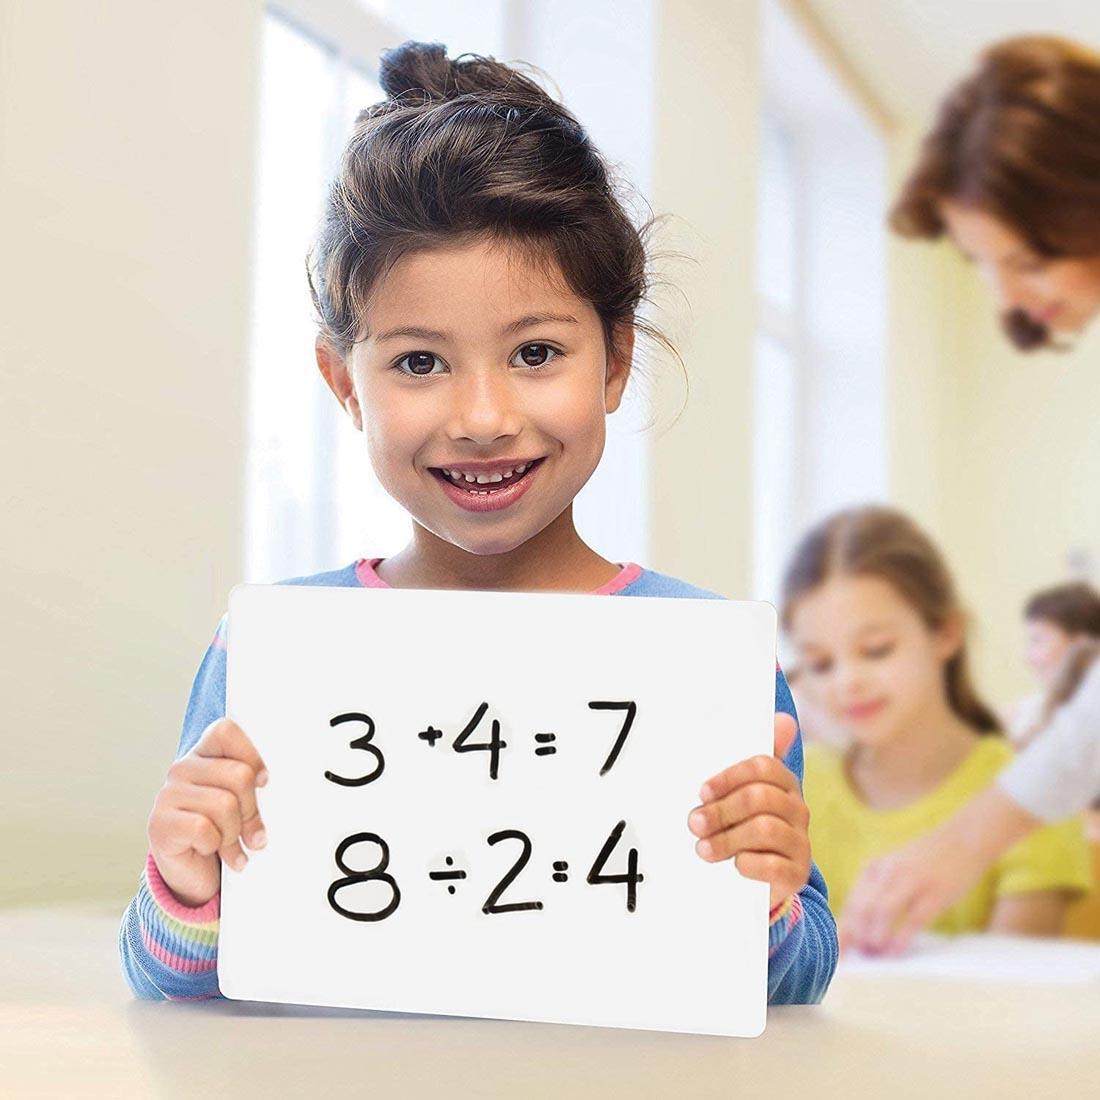 child holding a Dry Erase Lapboard with two equations written on it and a classroom scene in the background